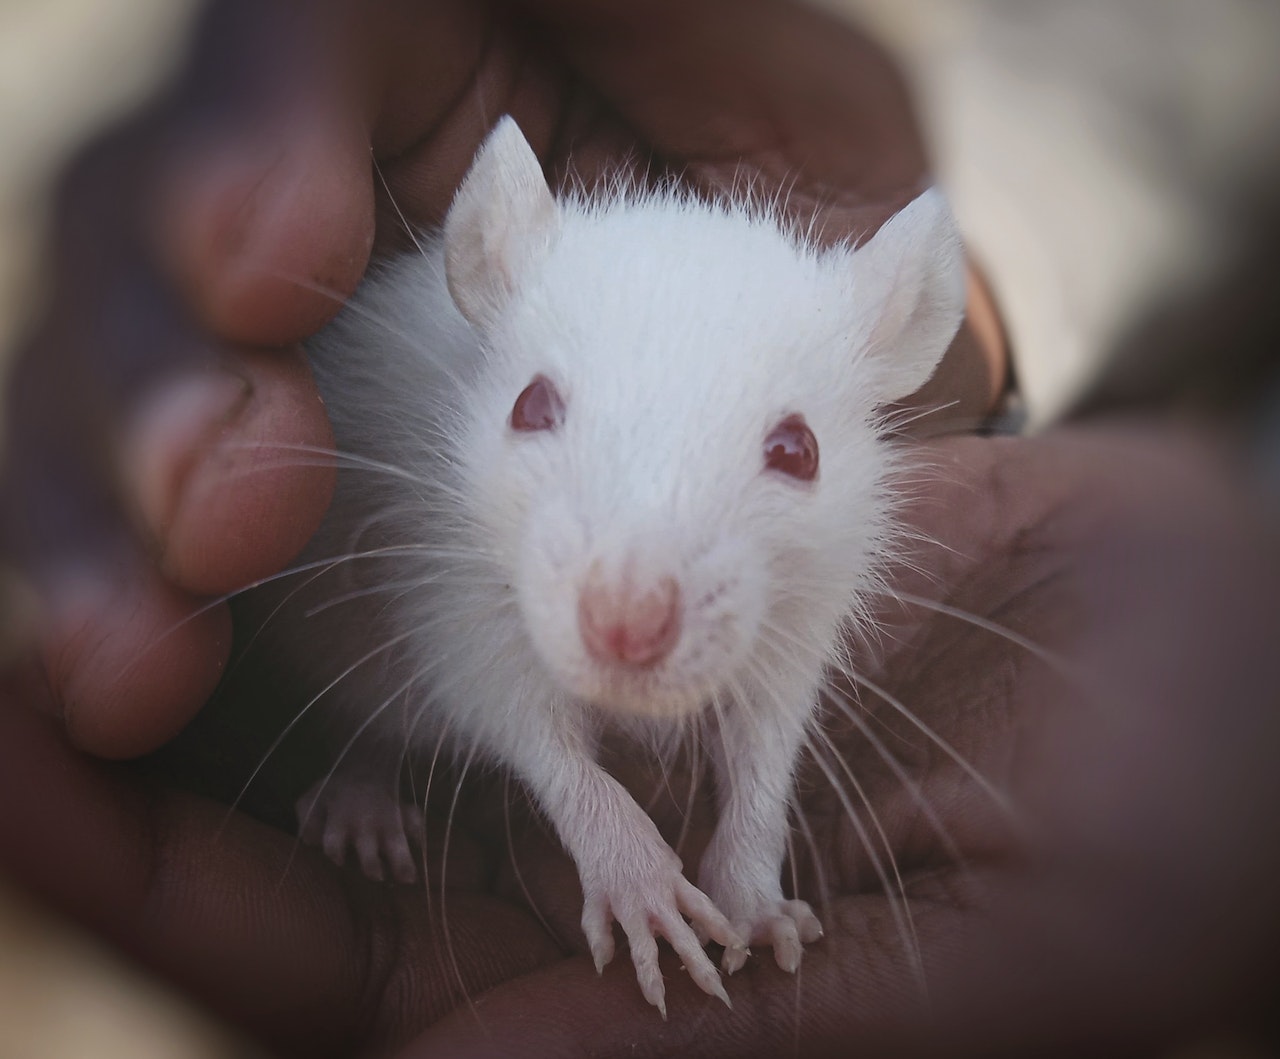 Cute White Rat on a Person's Hands